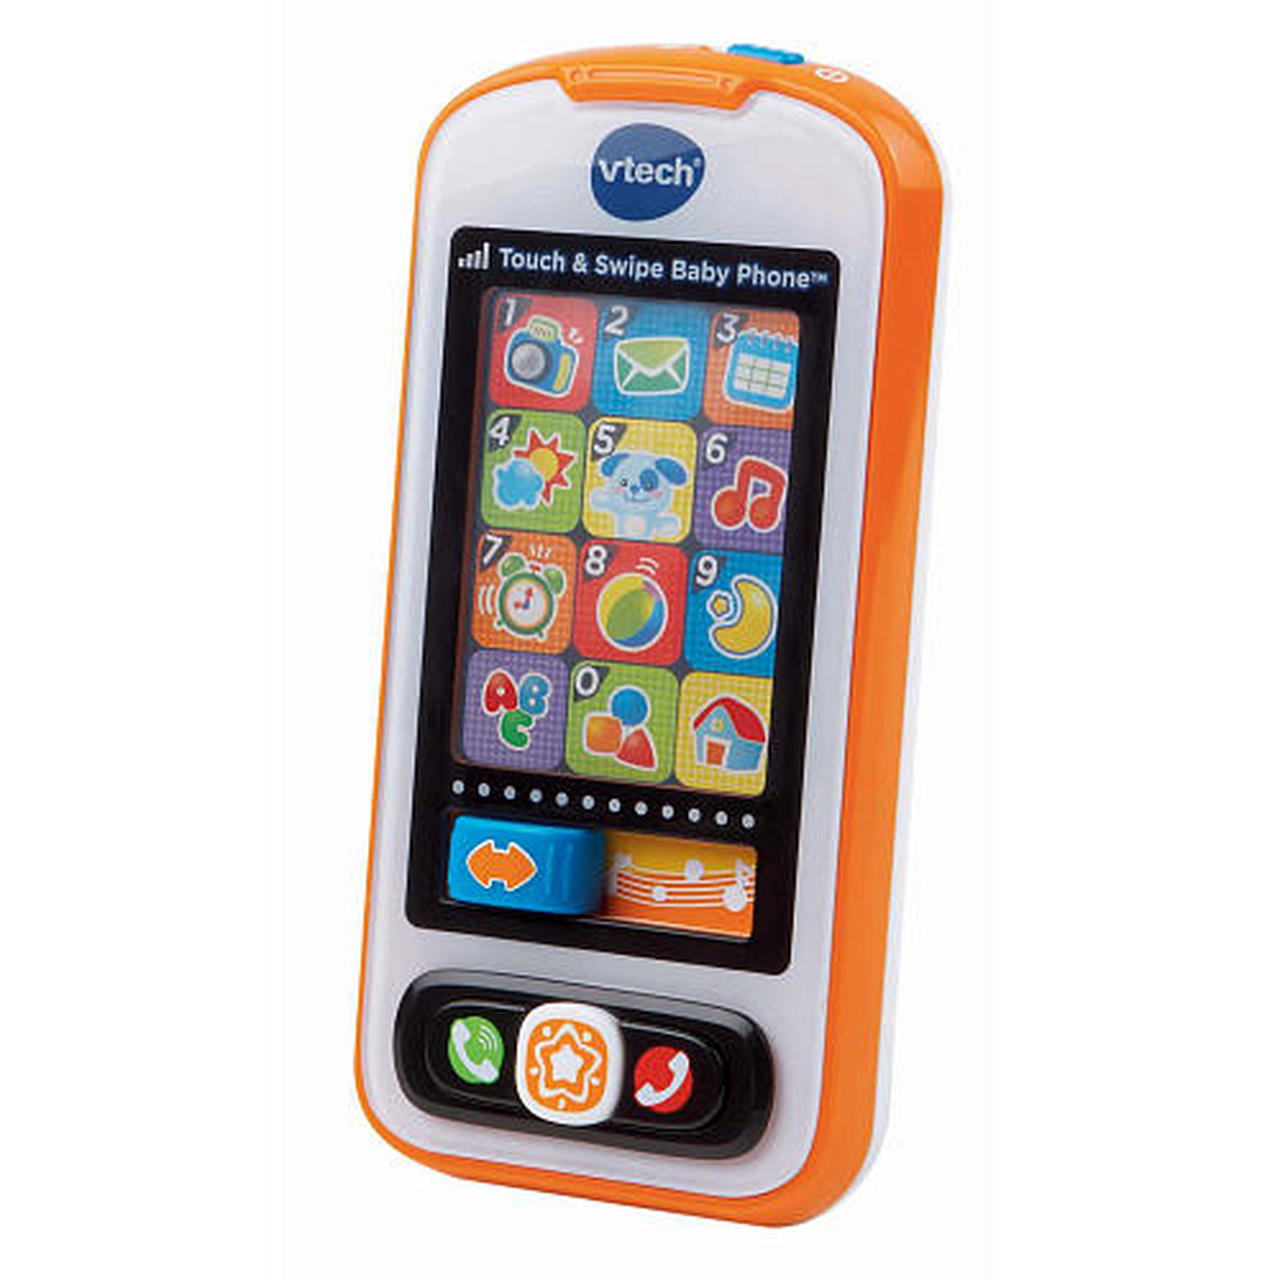 Vtech rock and roll radio.Musical and light up toddler toy. 